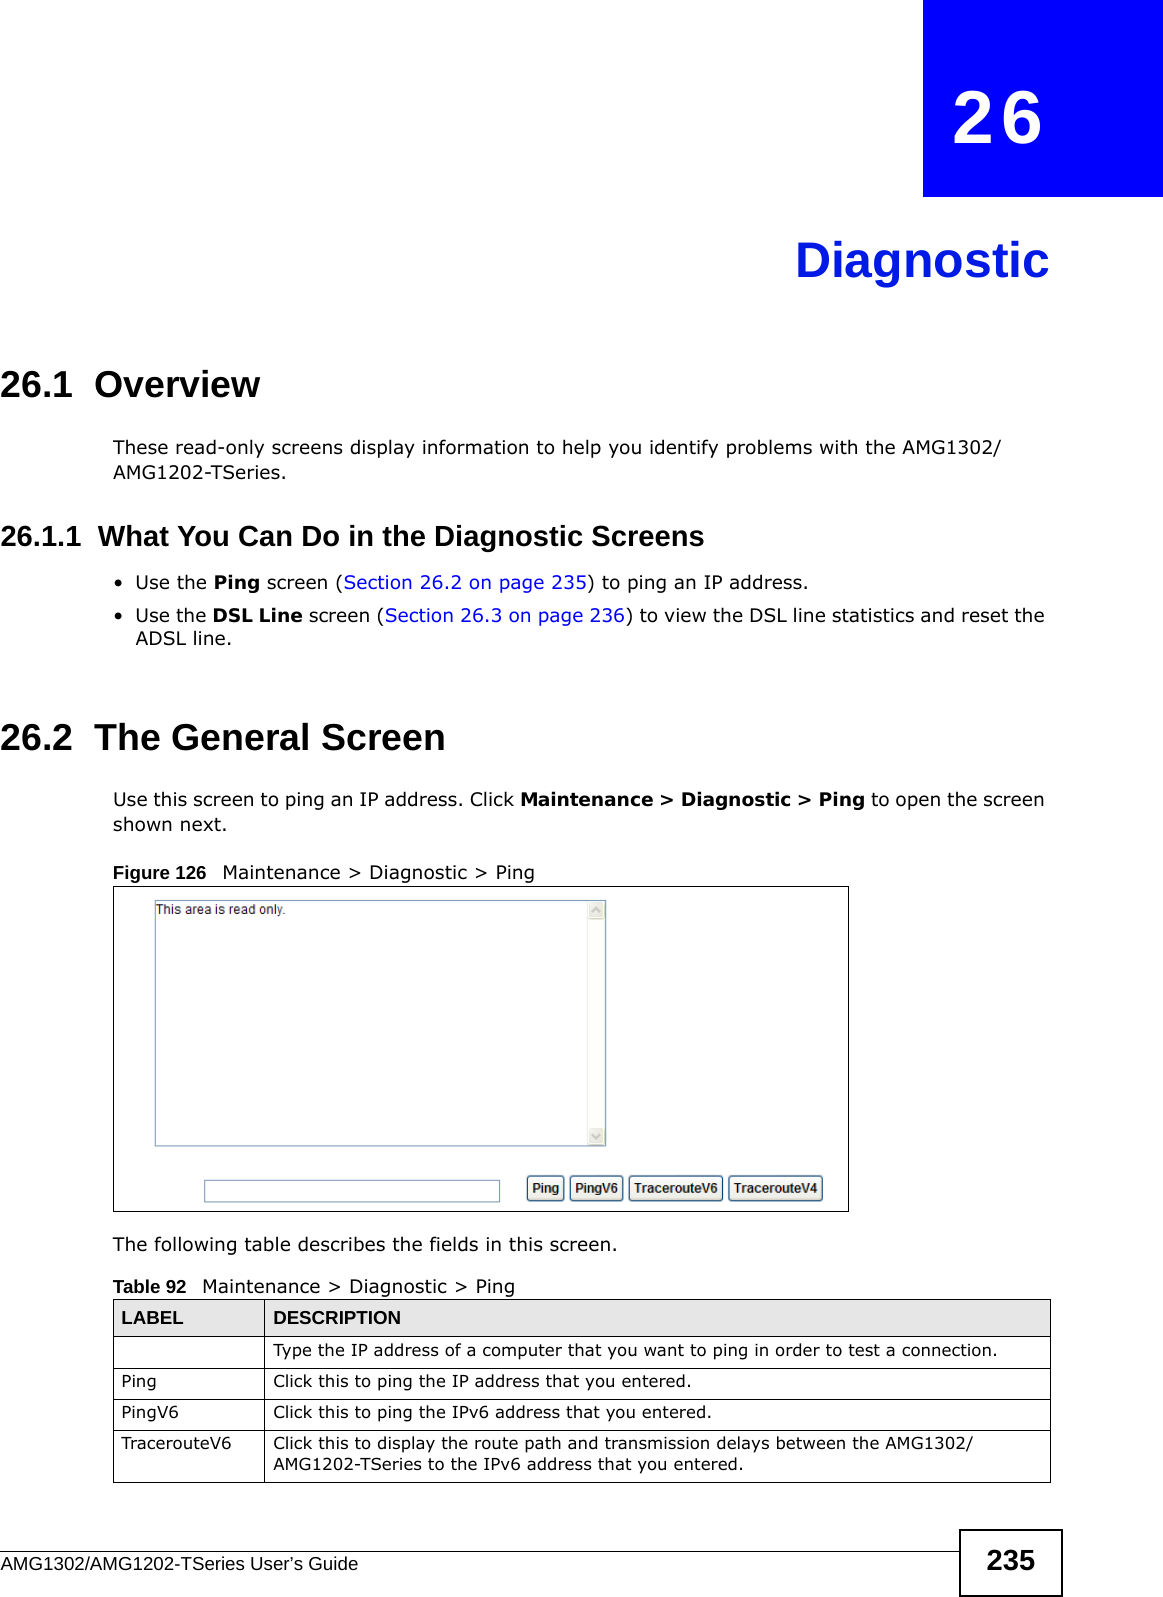 AMG1302/AMG1202-TSeries User’s Guide 235CHAPTER   26Diagnostic26.1  OverviewThese read-only screens display information to help you identify problems with the AMG1302/AMG1202-TSeries.26.1.1  What You Can Do in the Diagnostic Screens•Use the Ping screen (Section 26.2 on page 235) to ping an IP address.•Use the DSL Line screen (Section 26.3 on page 236) to view the DSL line statistics and reset the ADSL line.26.2  The General Screen Use this screen to ping an IP address. Click Maintenance &gt; Diagnostic &gt; Ping to open the screen shown next.Figure 126   Maintenance &gt; Diagnostic &gt; PingThe following table describes the fields in this screen. Table 92   Maintenance &gt; Diagnostic &gt; PingLABEL DESCRIPTIONType the IP address of a computer that you want to ping in order to test a connection.Ping Click this to ping the IP address that you entered.PingV6 Click this to ping the IPv6 address that you entered.TracerouteV6 Click this to display the route path and transmission delays between the AMG1302/AMG1202-TSeries to the IPv6 address that you entered.